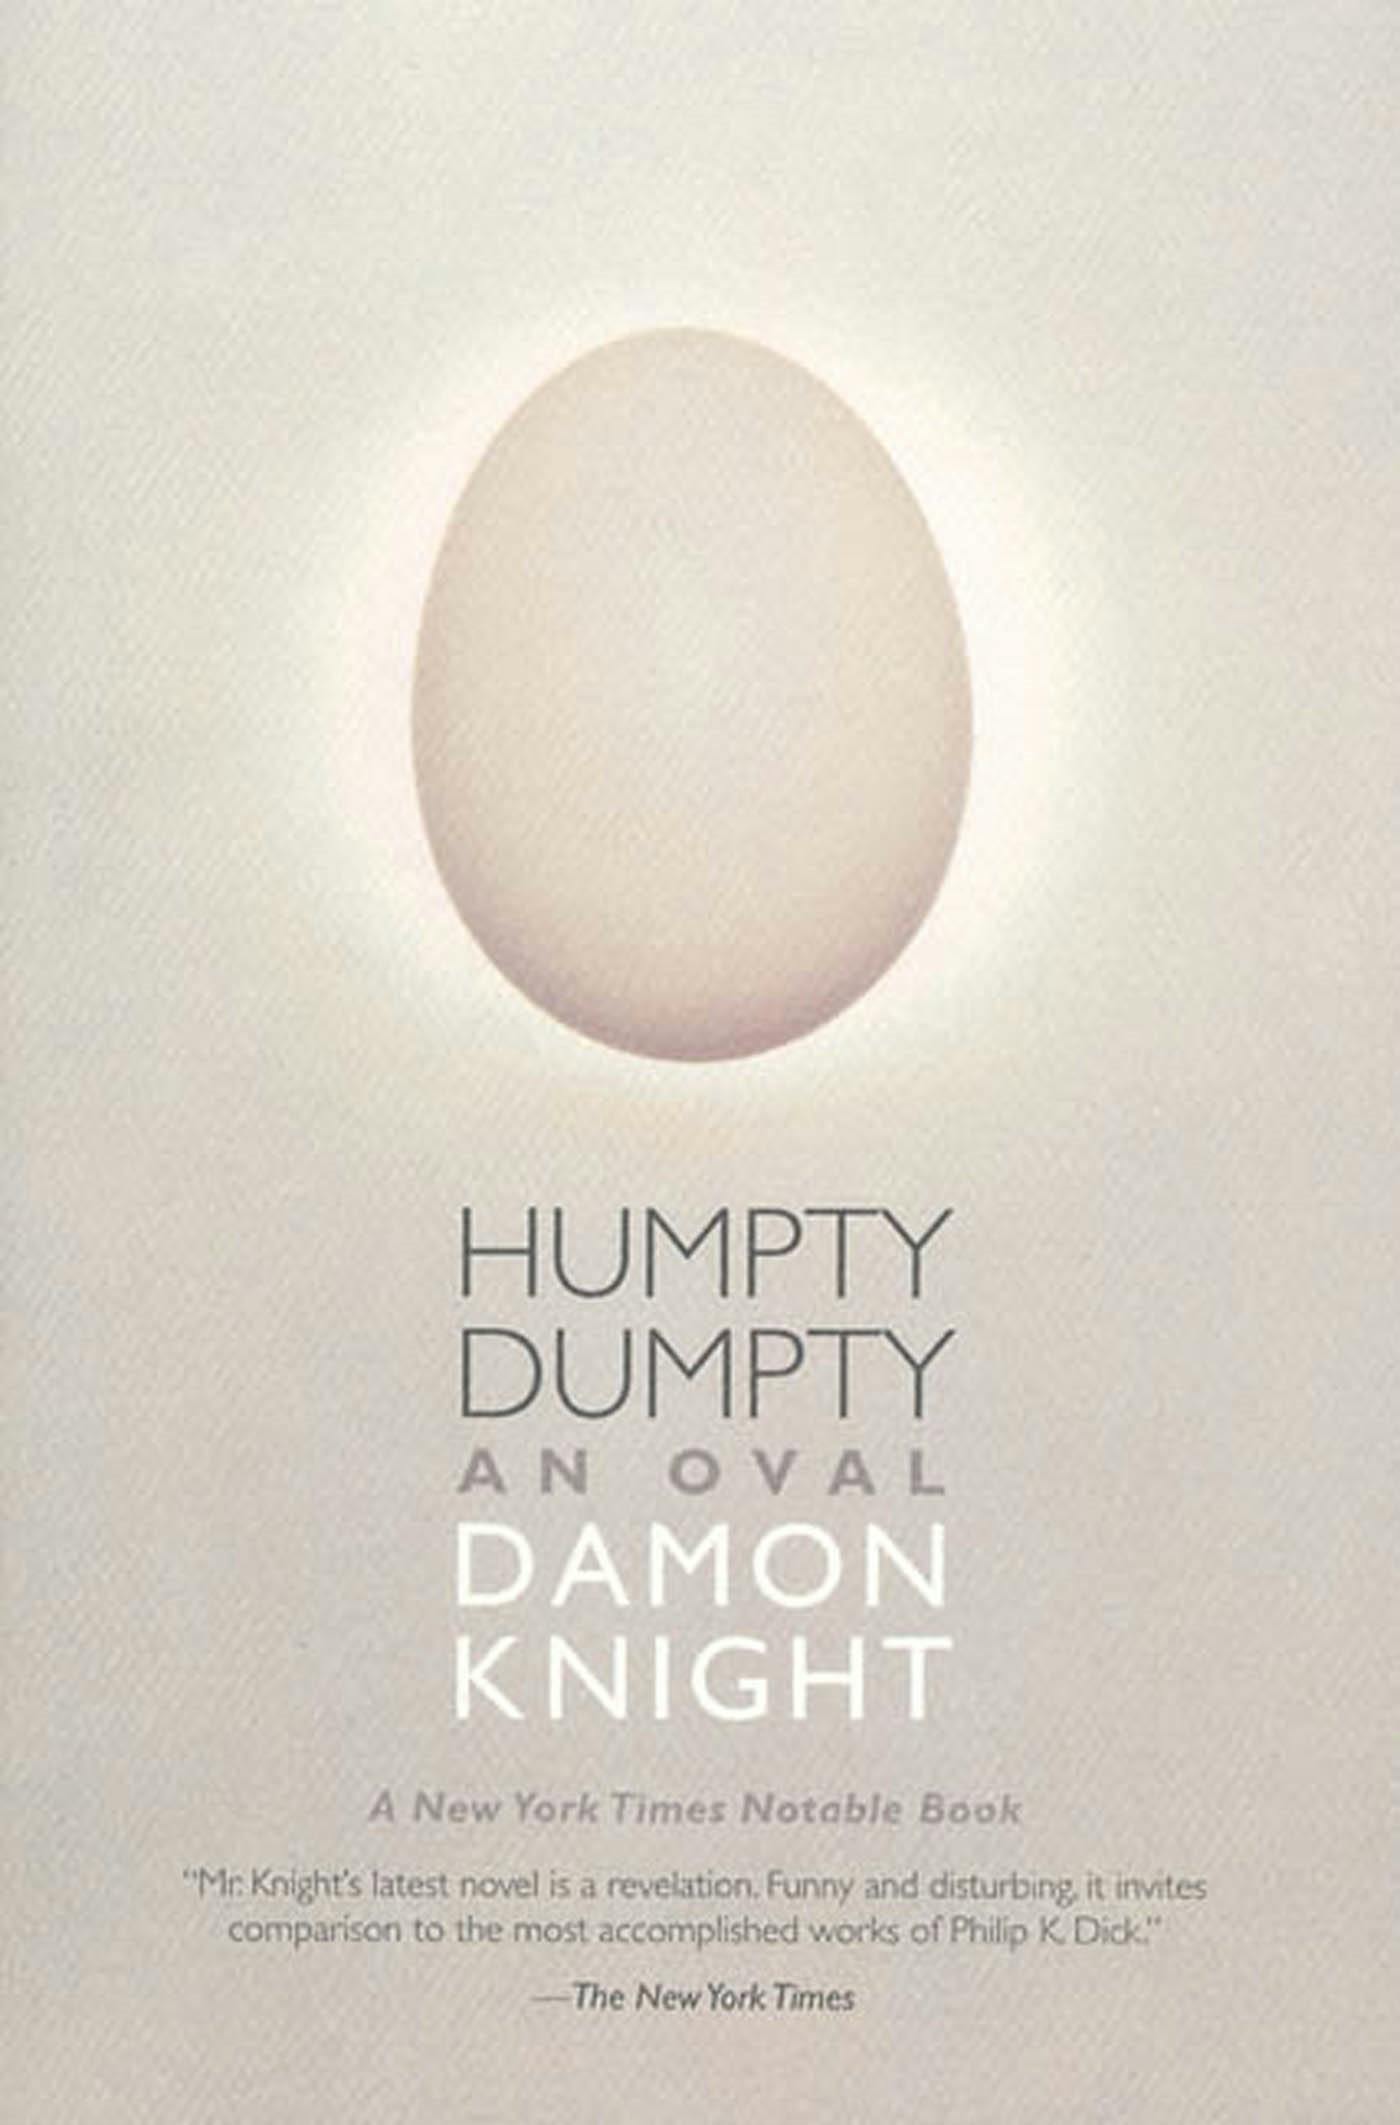 Cover for the book titled as: Humpty Dumpty